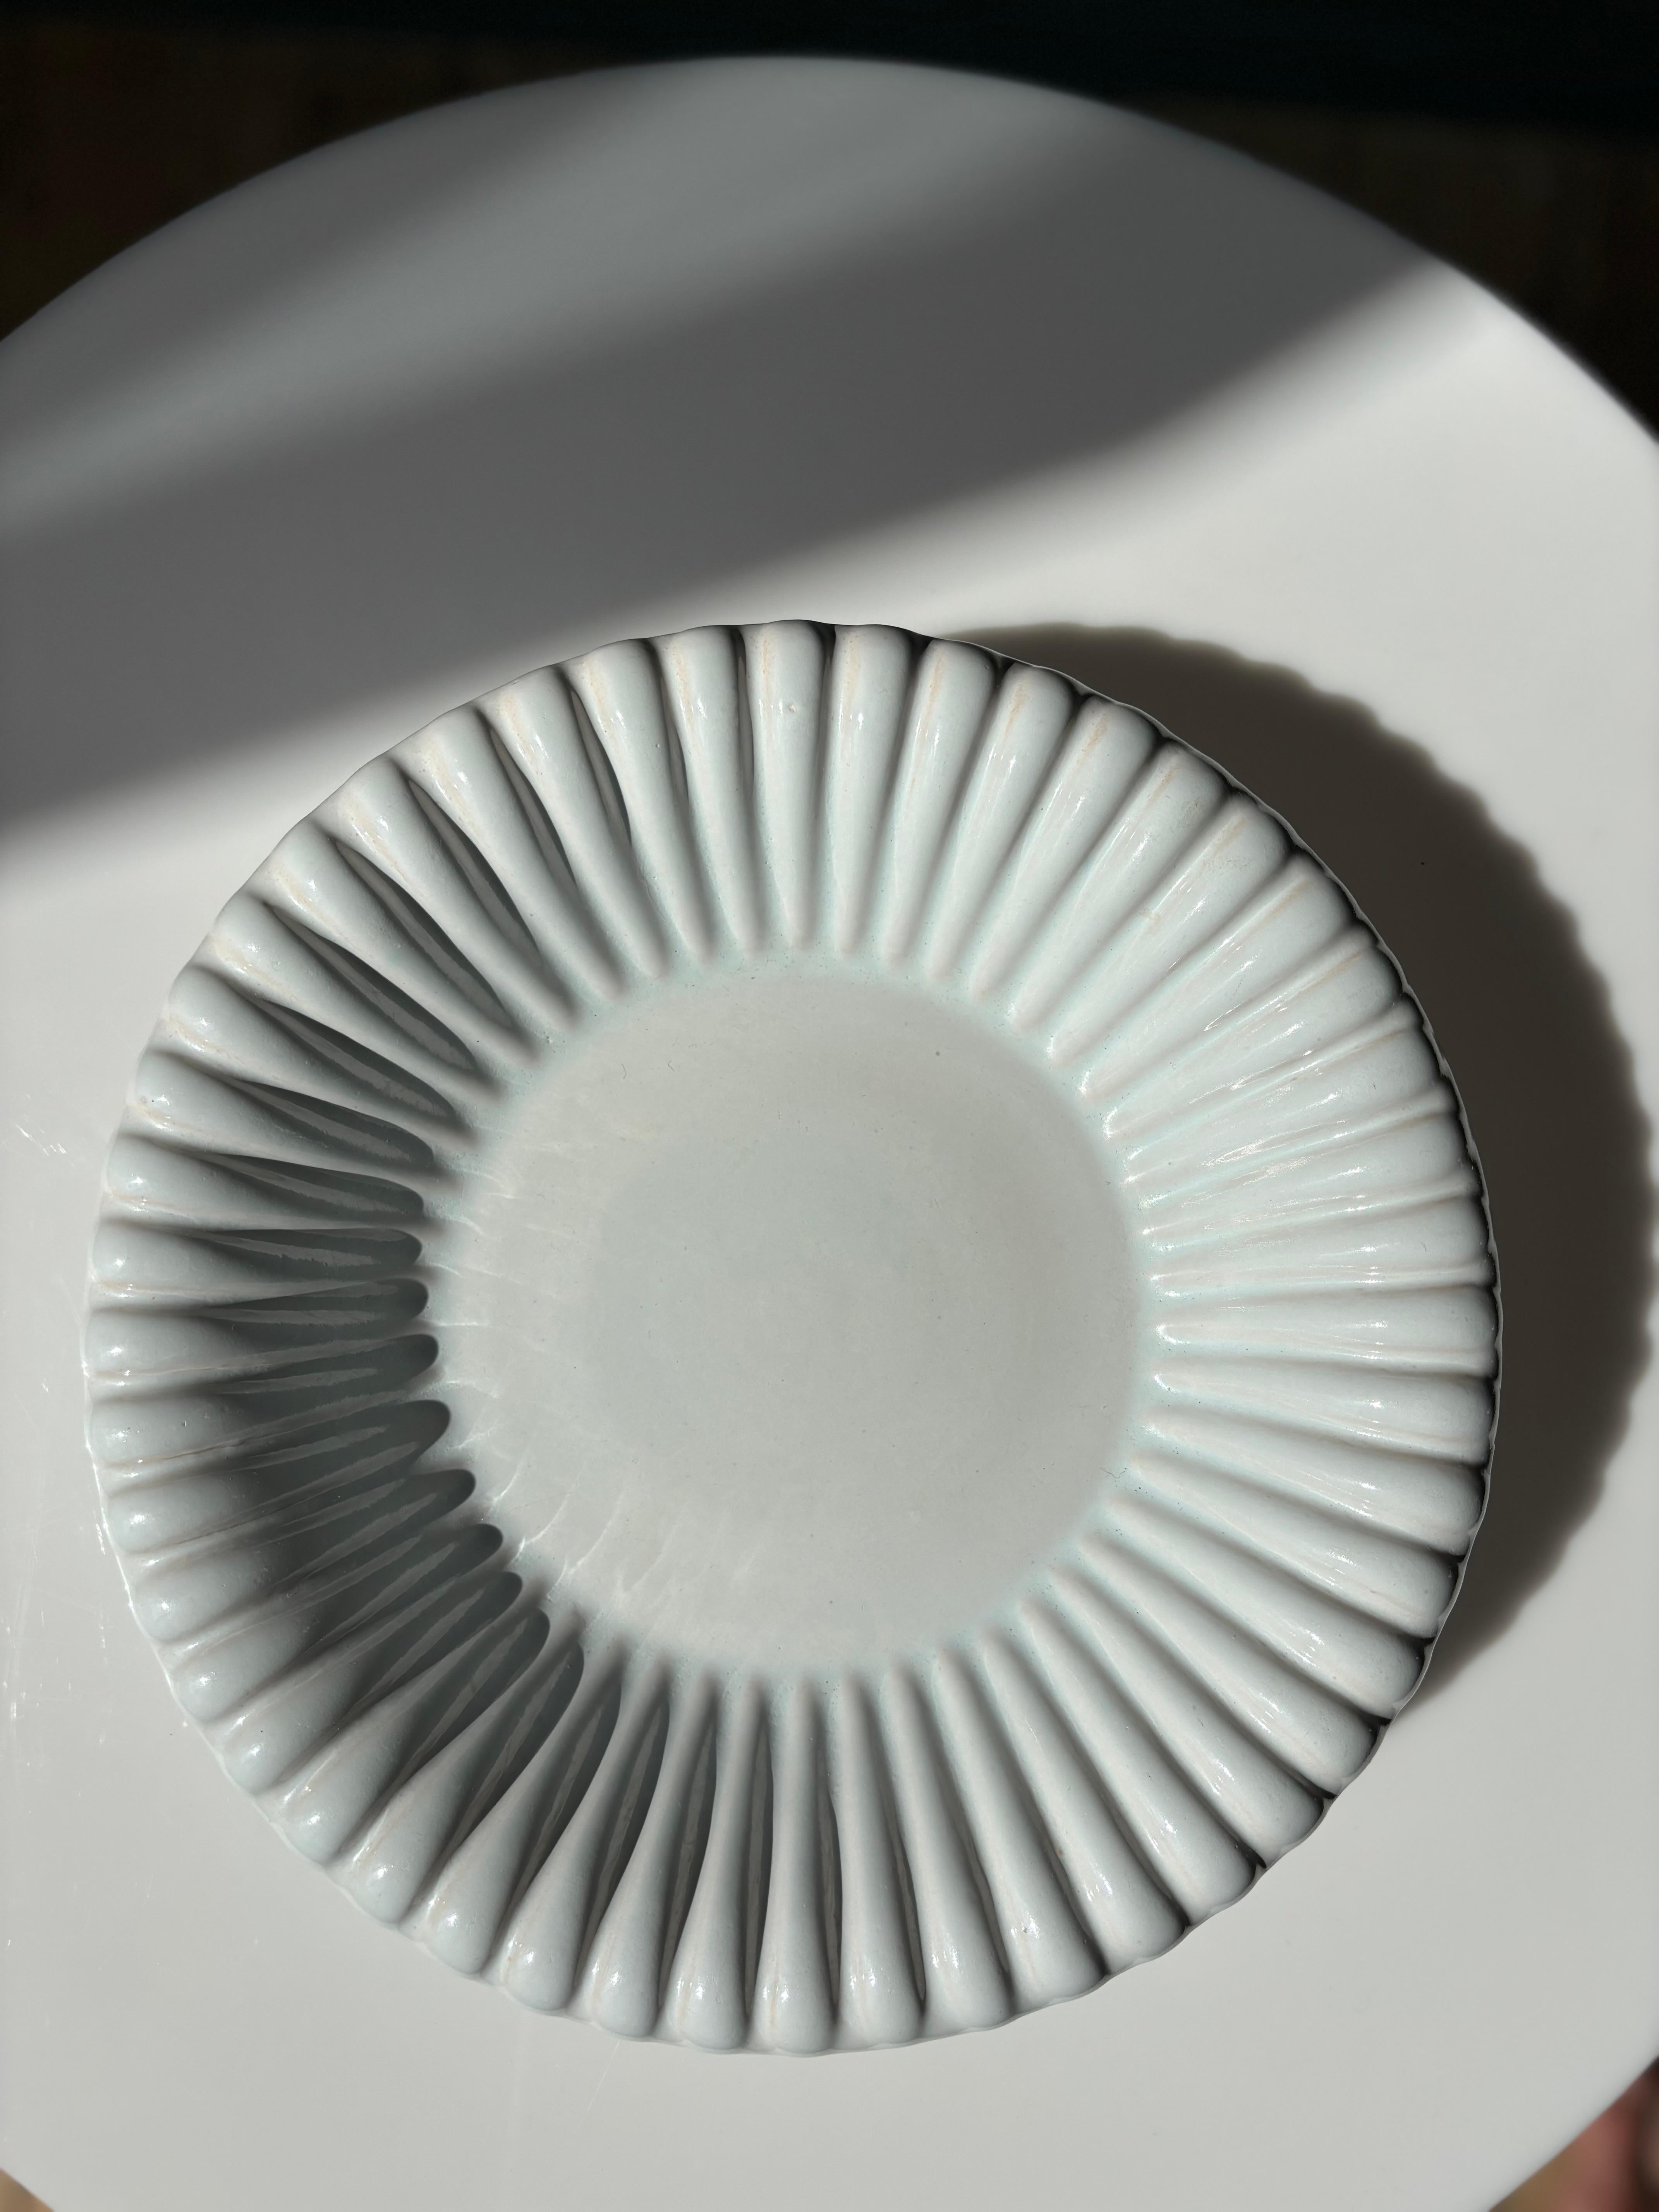 Handmade Danish midcentury modern decorative dish bowl designed and manufactured on the island of Bornholm by Michael Andersen & Son in the early 1960s. Crisp white glaze with a very slight light blue tint covers the bowl’s round shape and soft